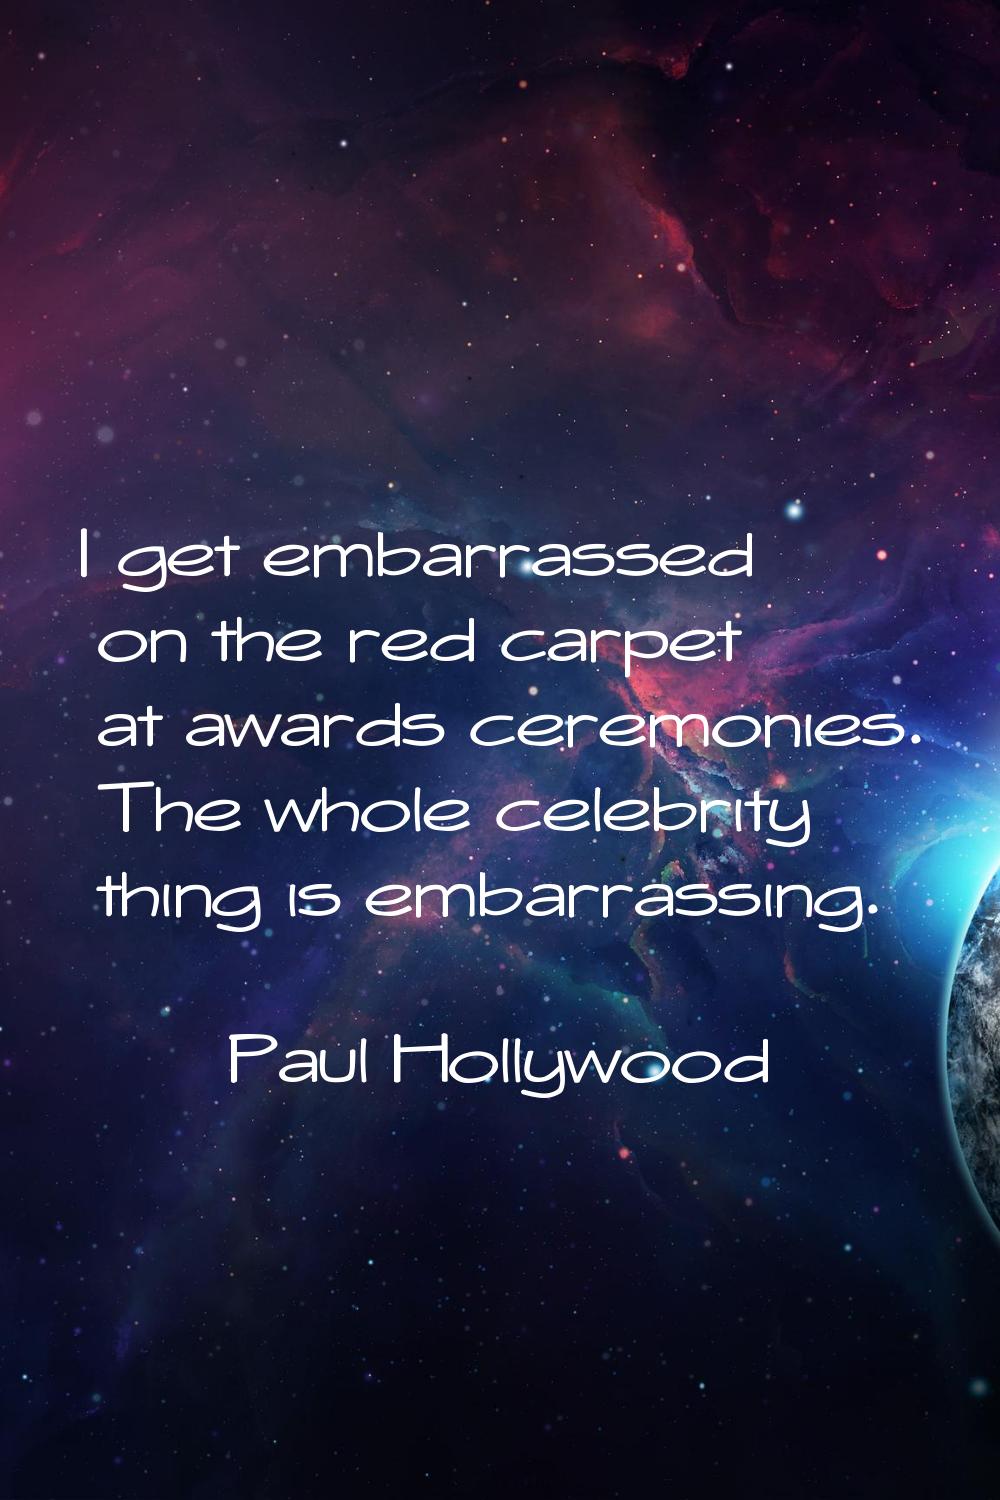 I get embarrassed on the red carpet at awards ceremonies. The whole celebrity thing is embarrassing